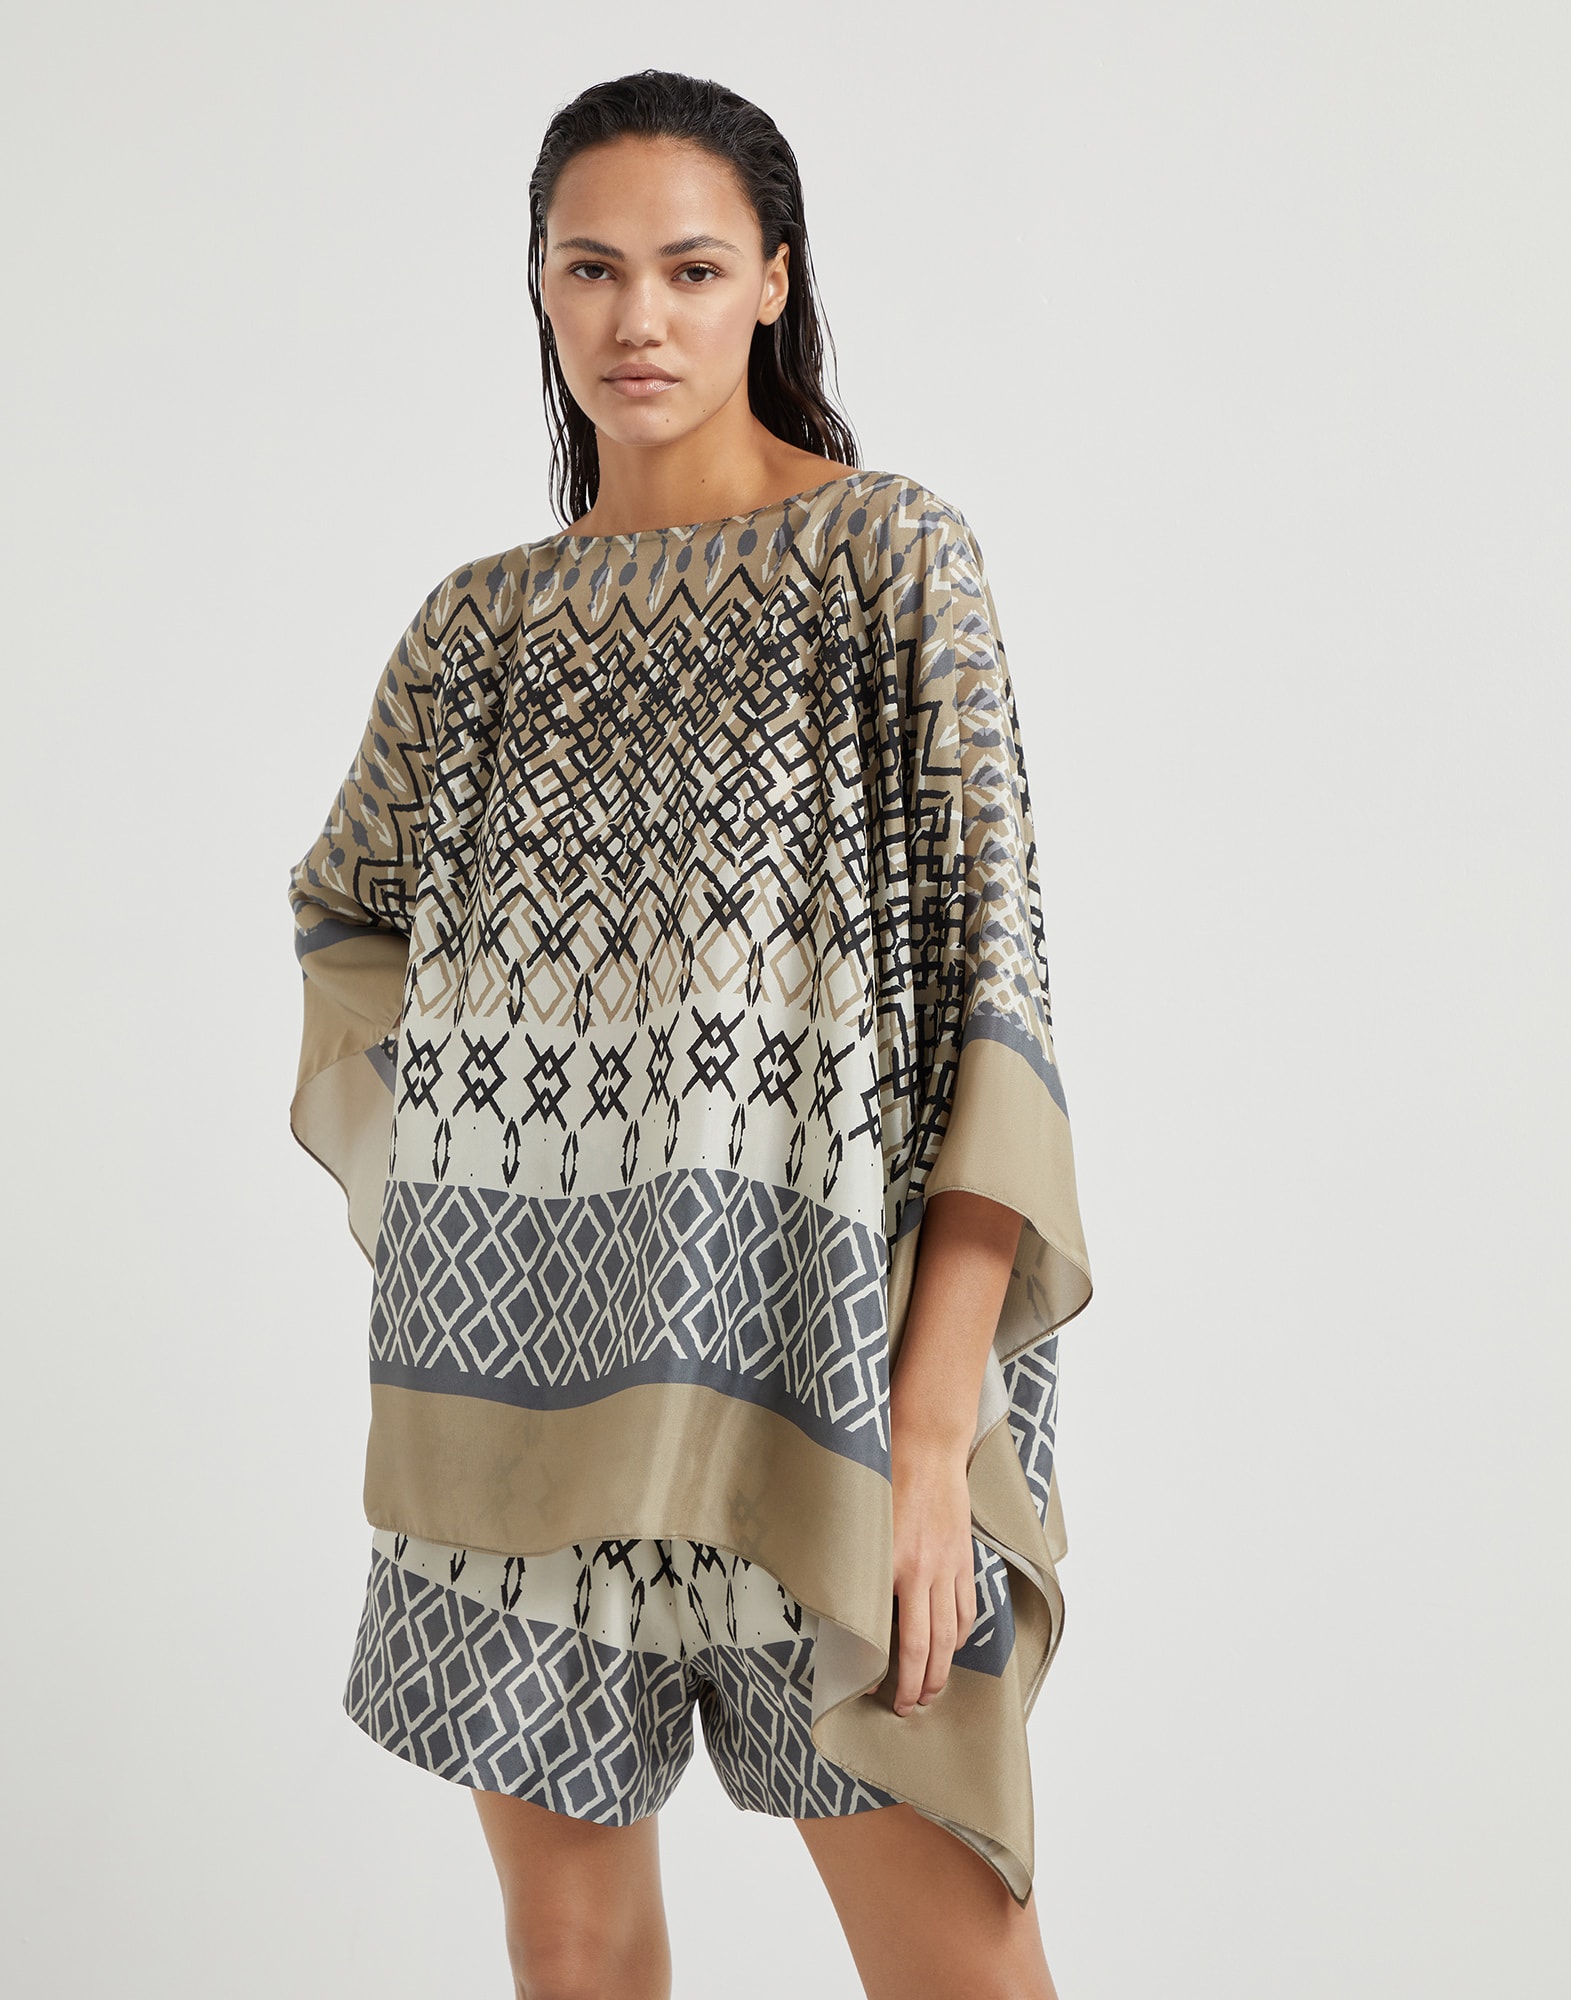 Poncho - Front view